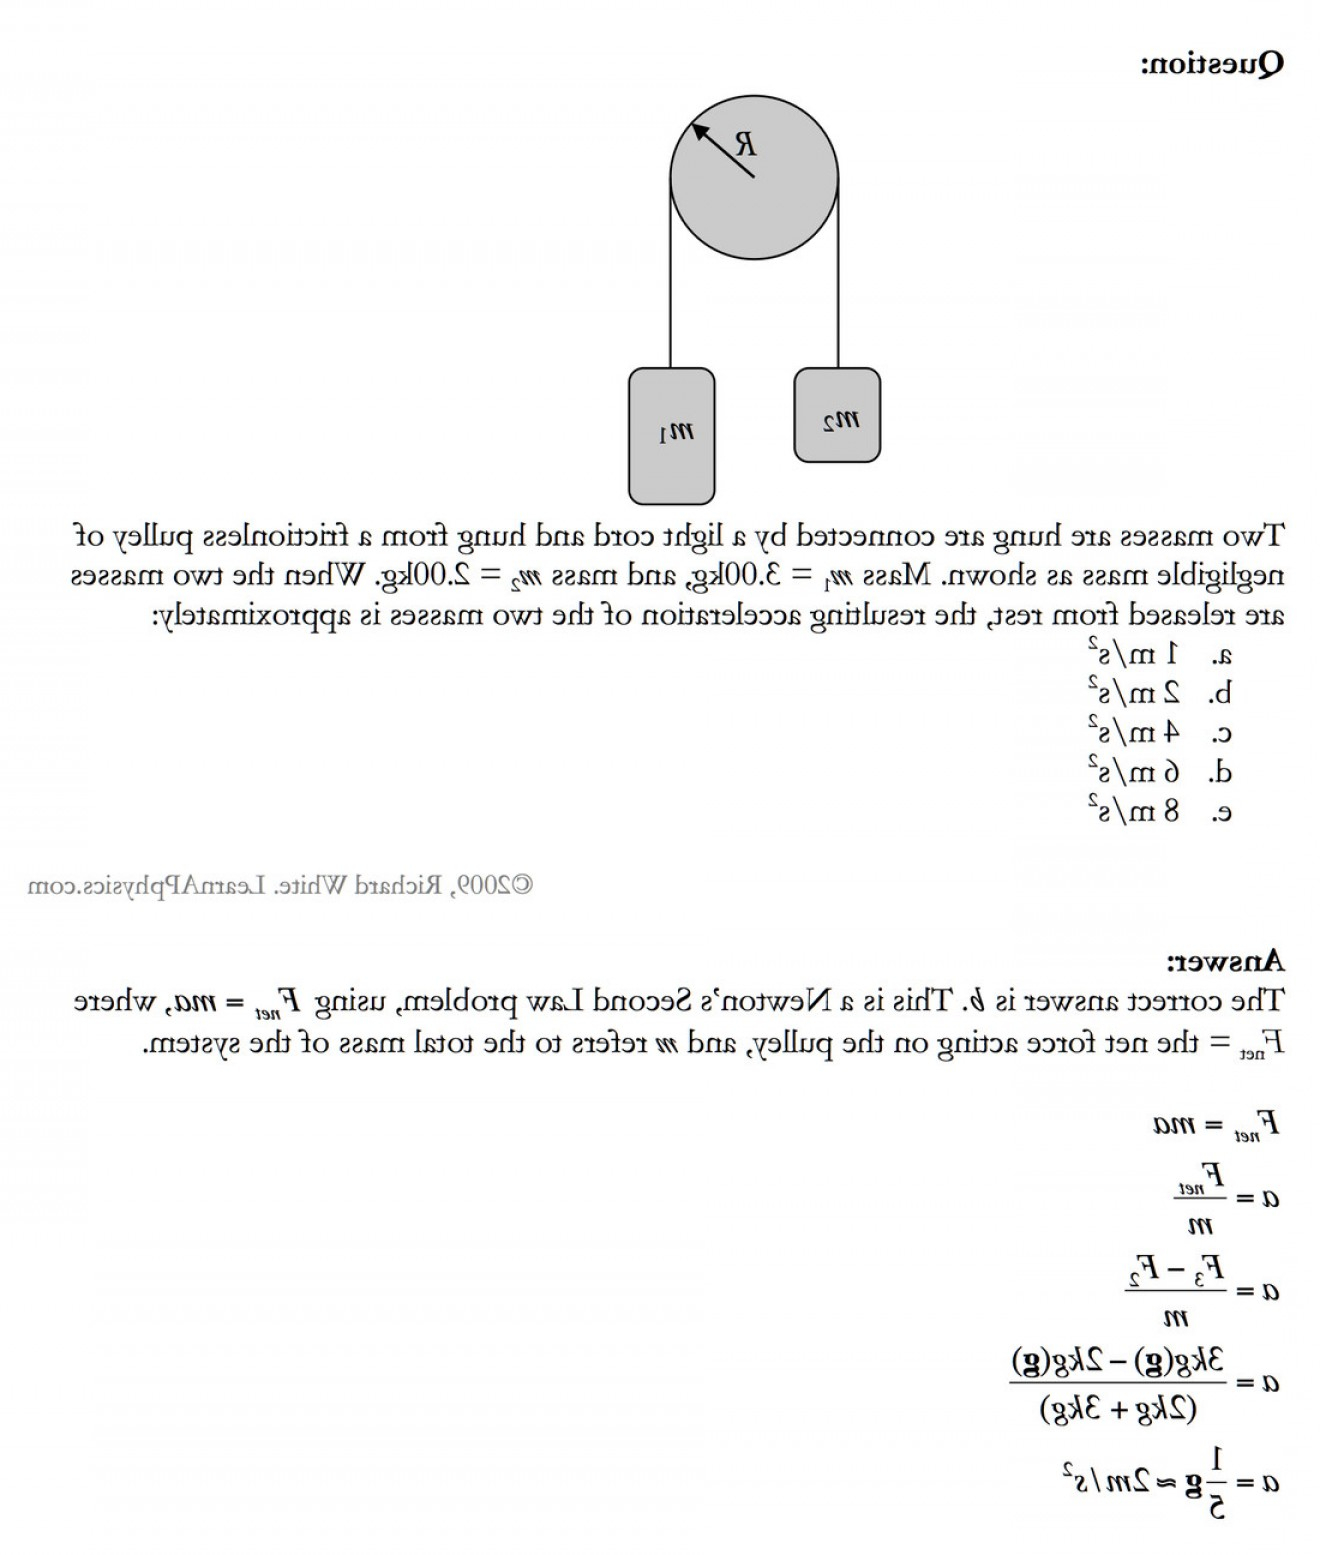 Free Body Diagram Worksheet Drawing Free Body Diagrams Worksheet Answers Physics Classroom